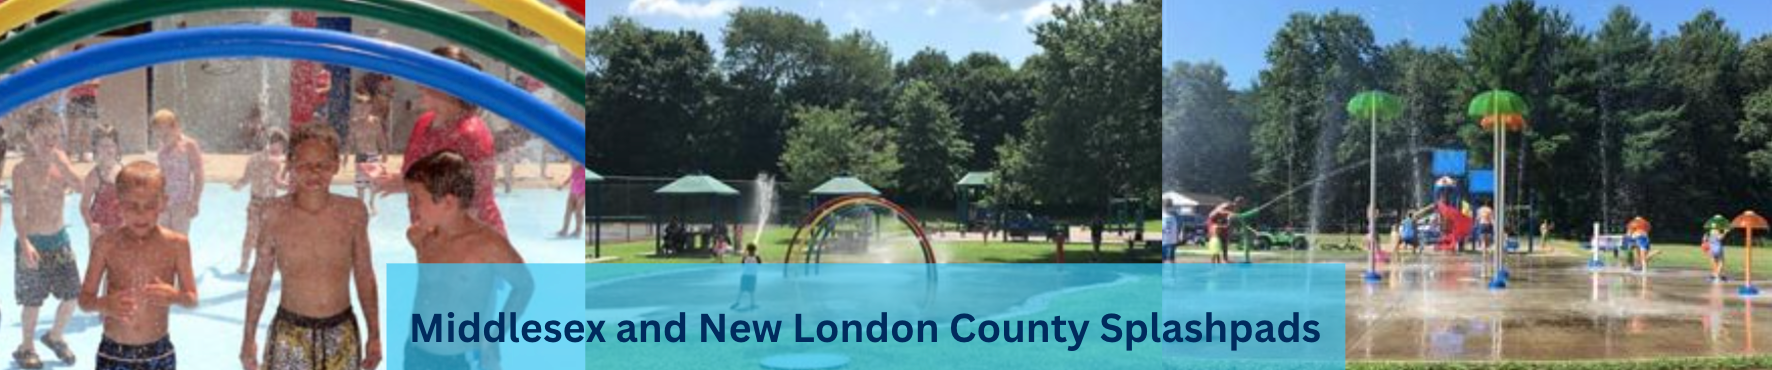 Middlesex and New London Splashpads